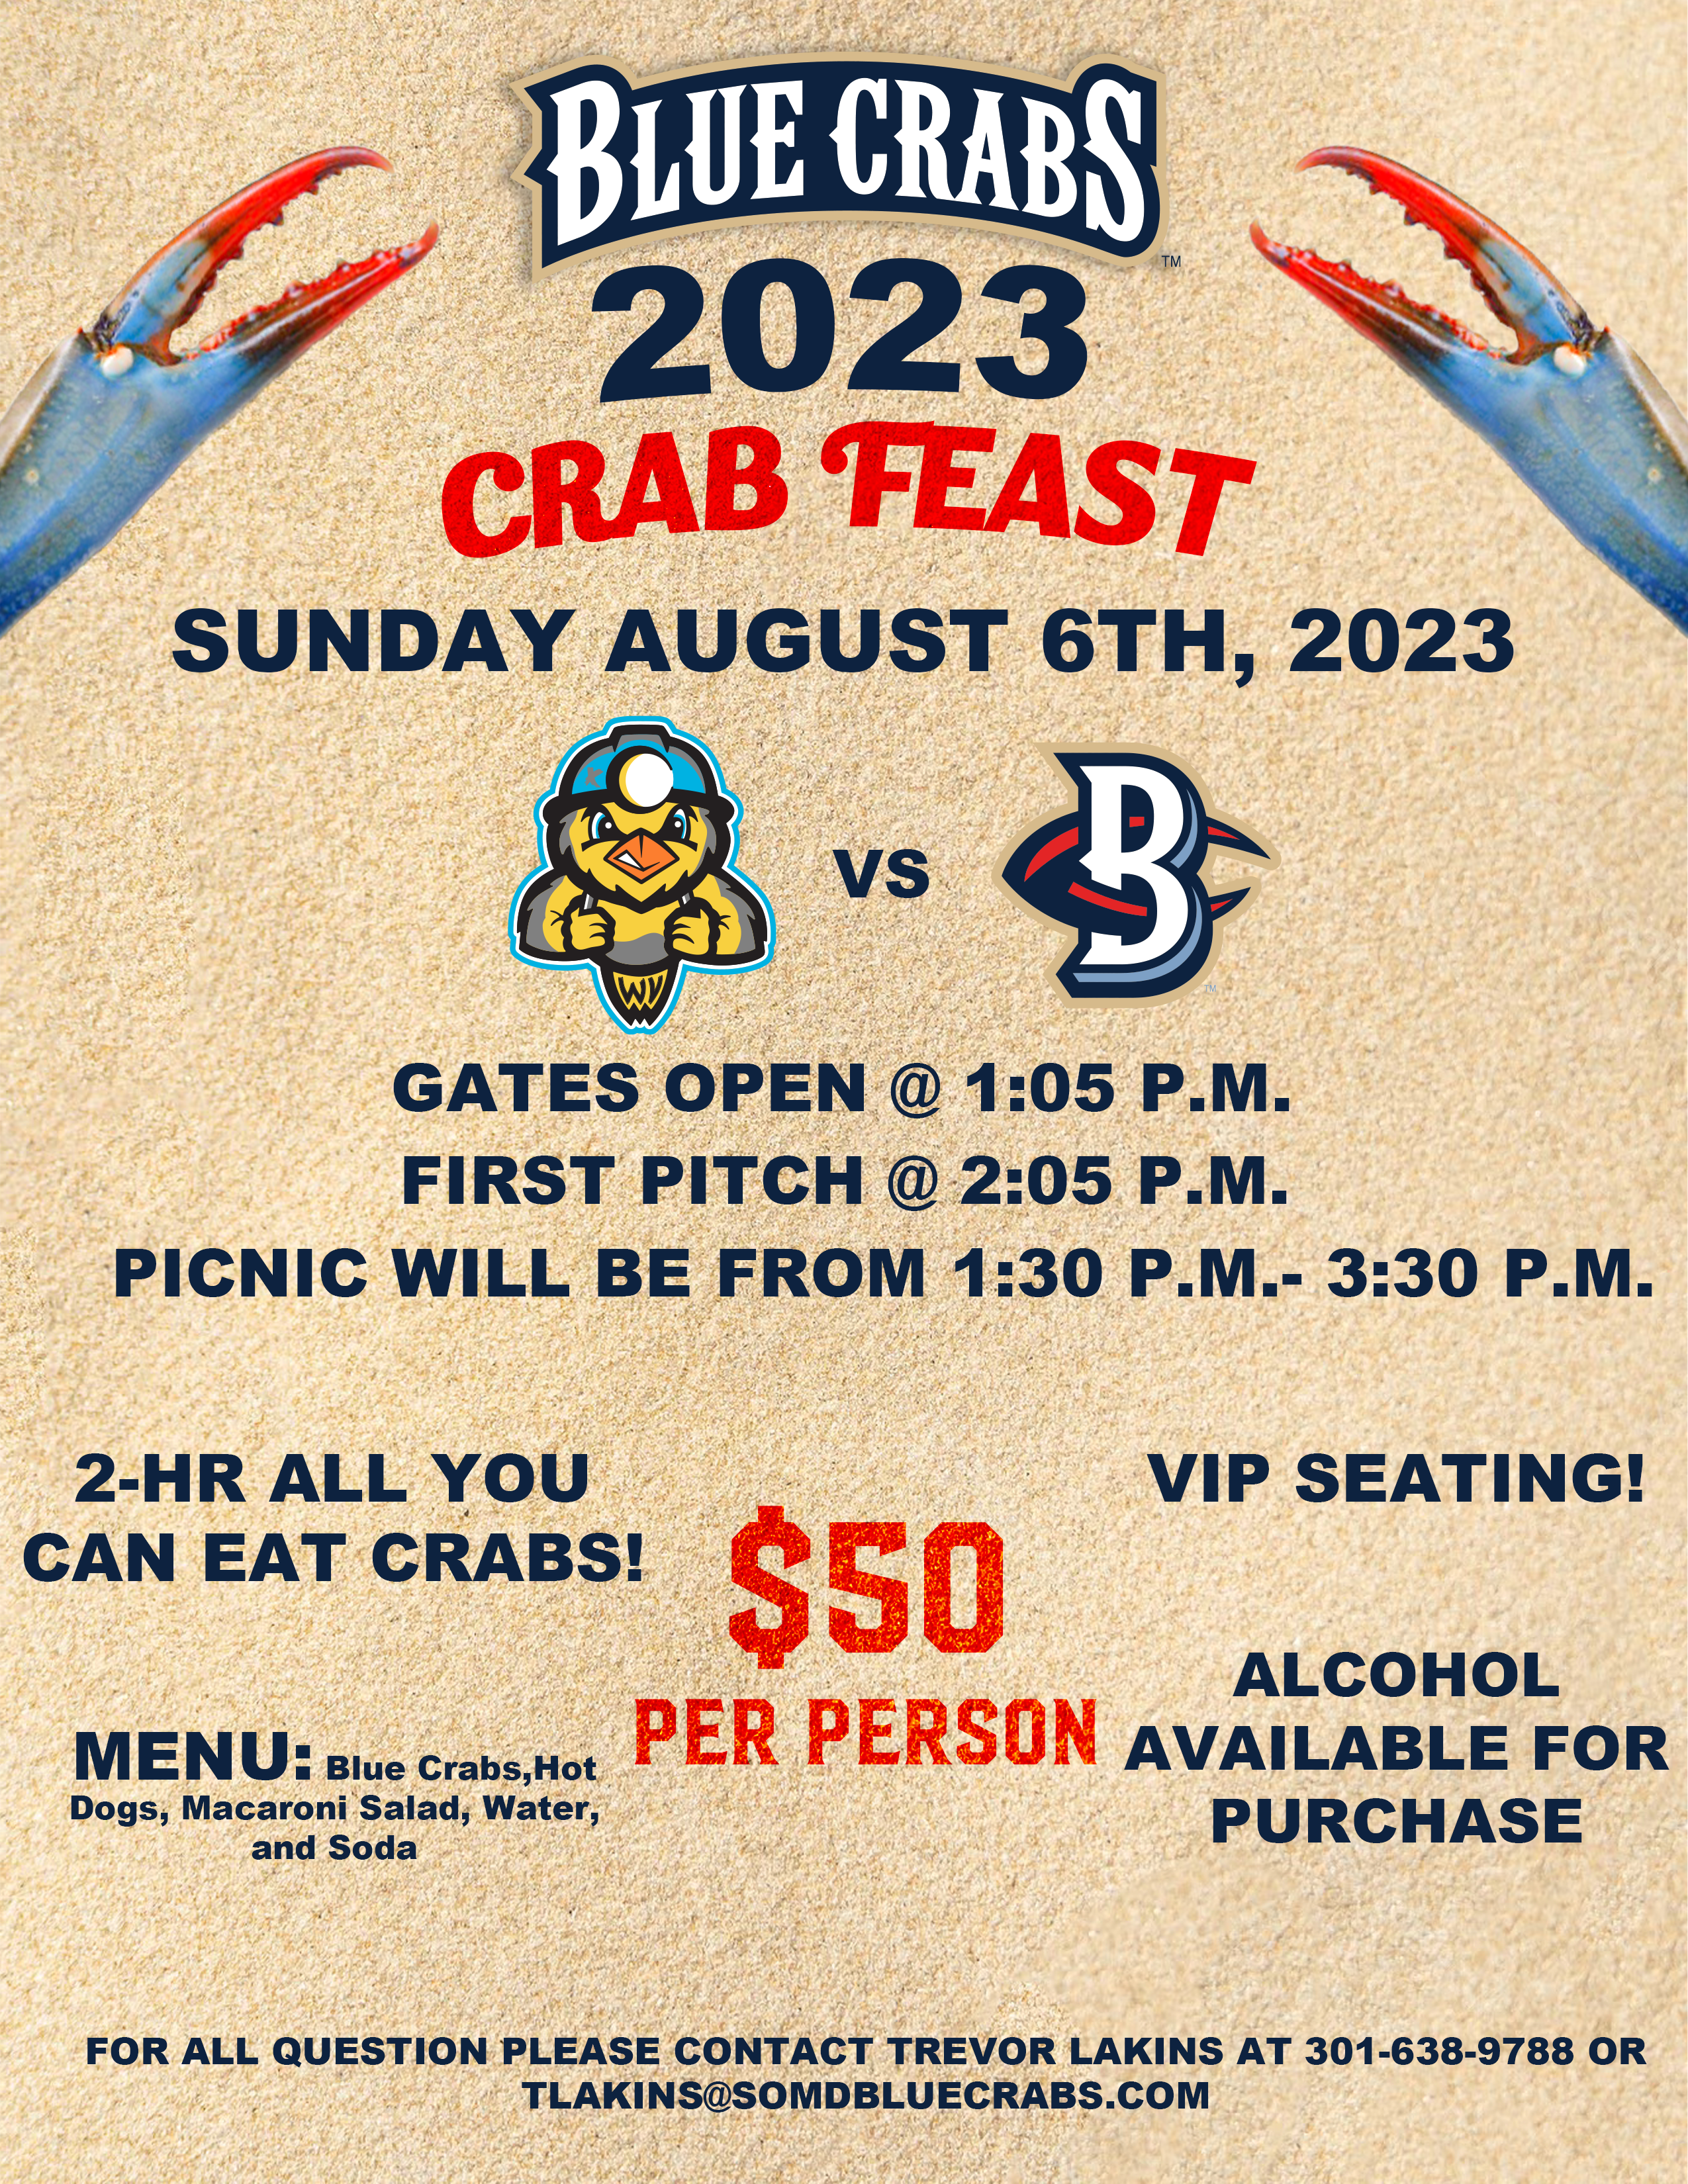 2023 All-You-Can-Eat Crab Feast!